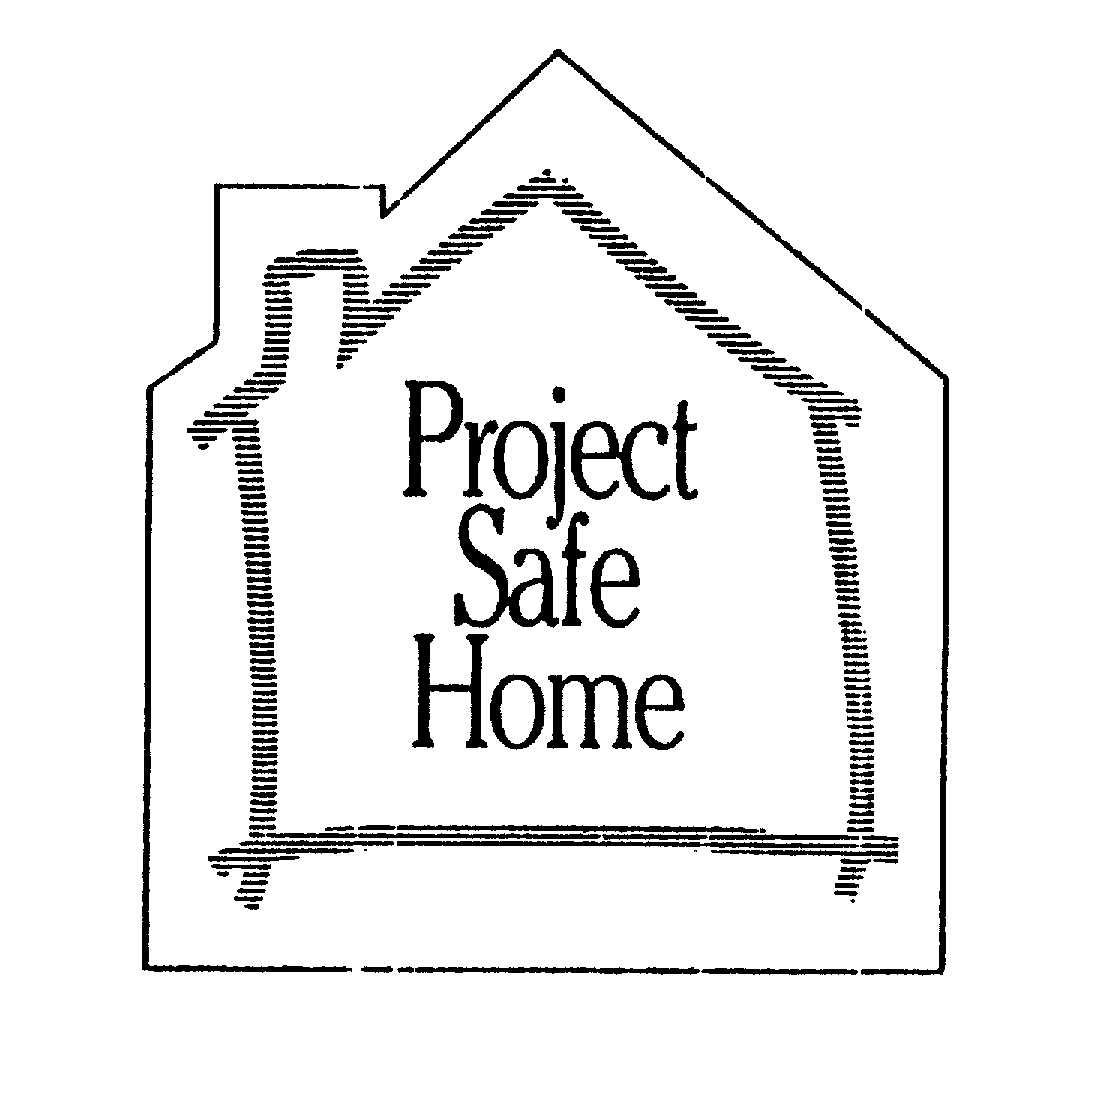  PROJECT SAFE HOME